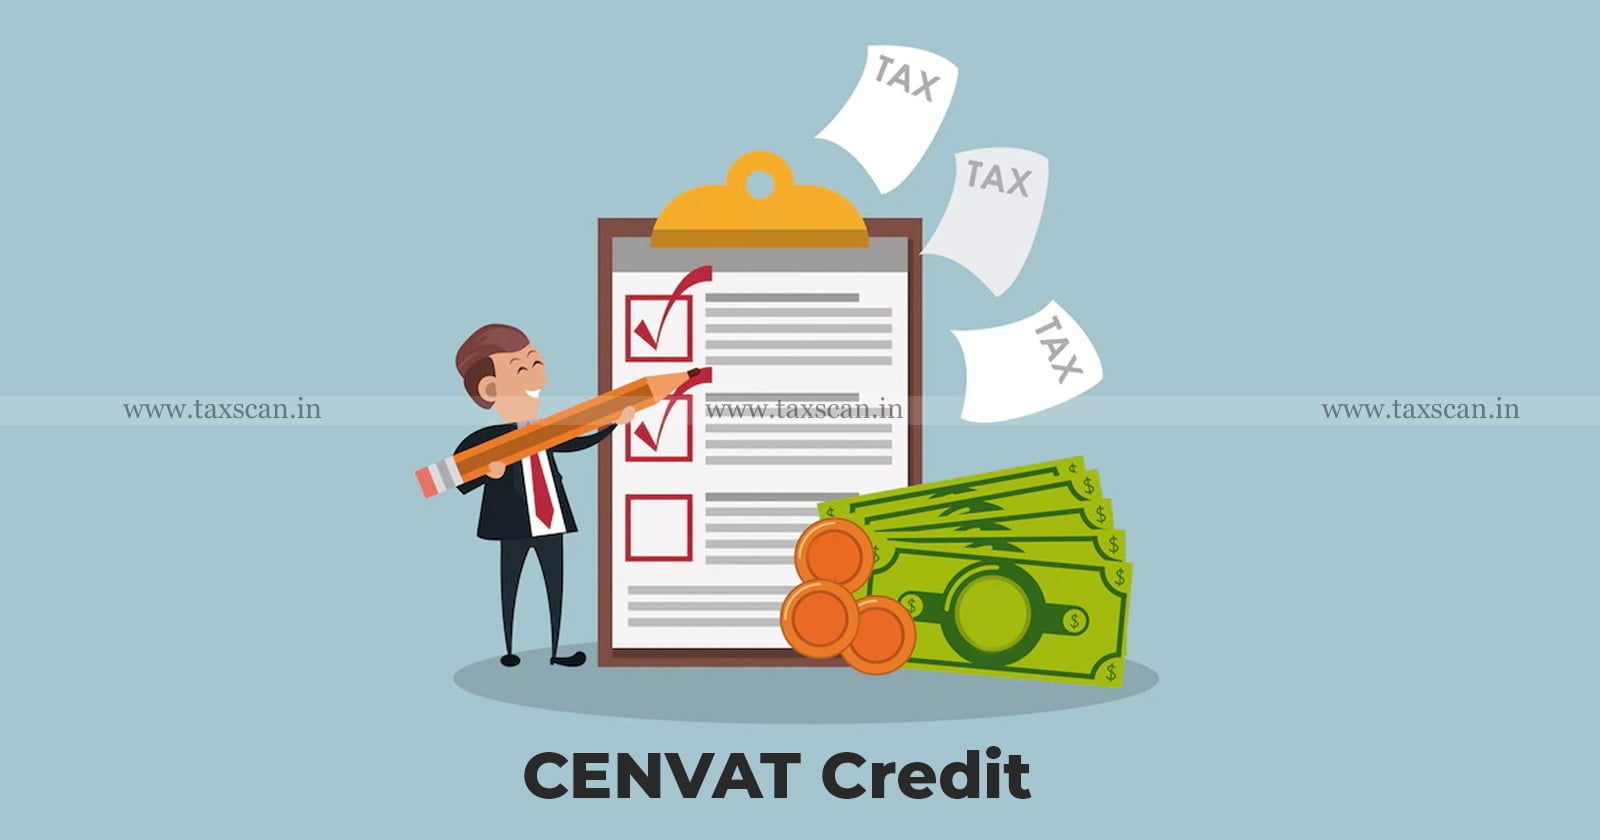 Cenvat Credit - inputs - Cenvat Credit availed on inputs that were written off Not Subject to Reversal - CESTAT - taxscan